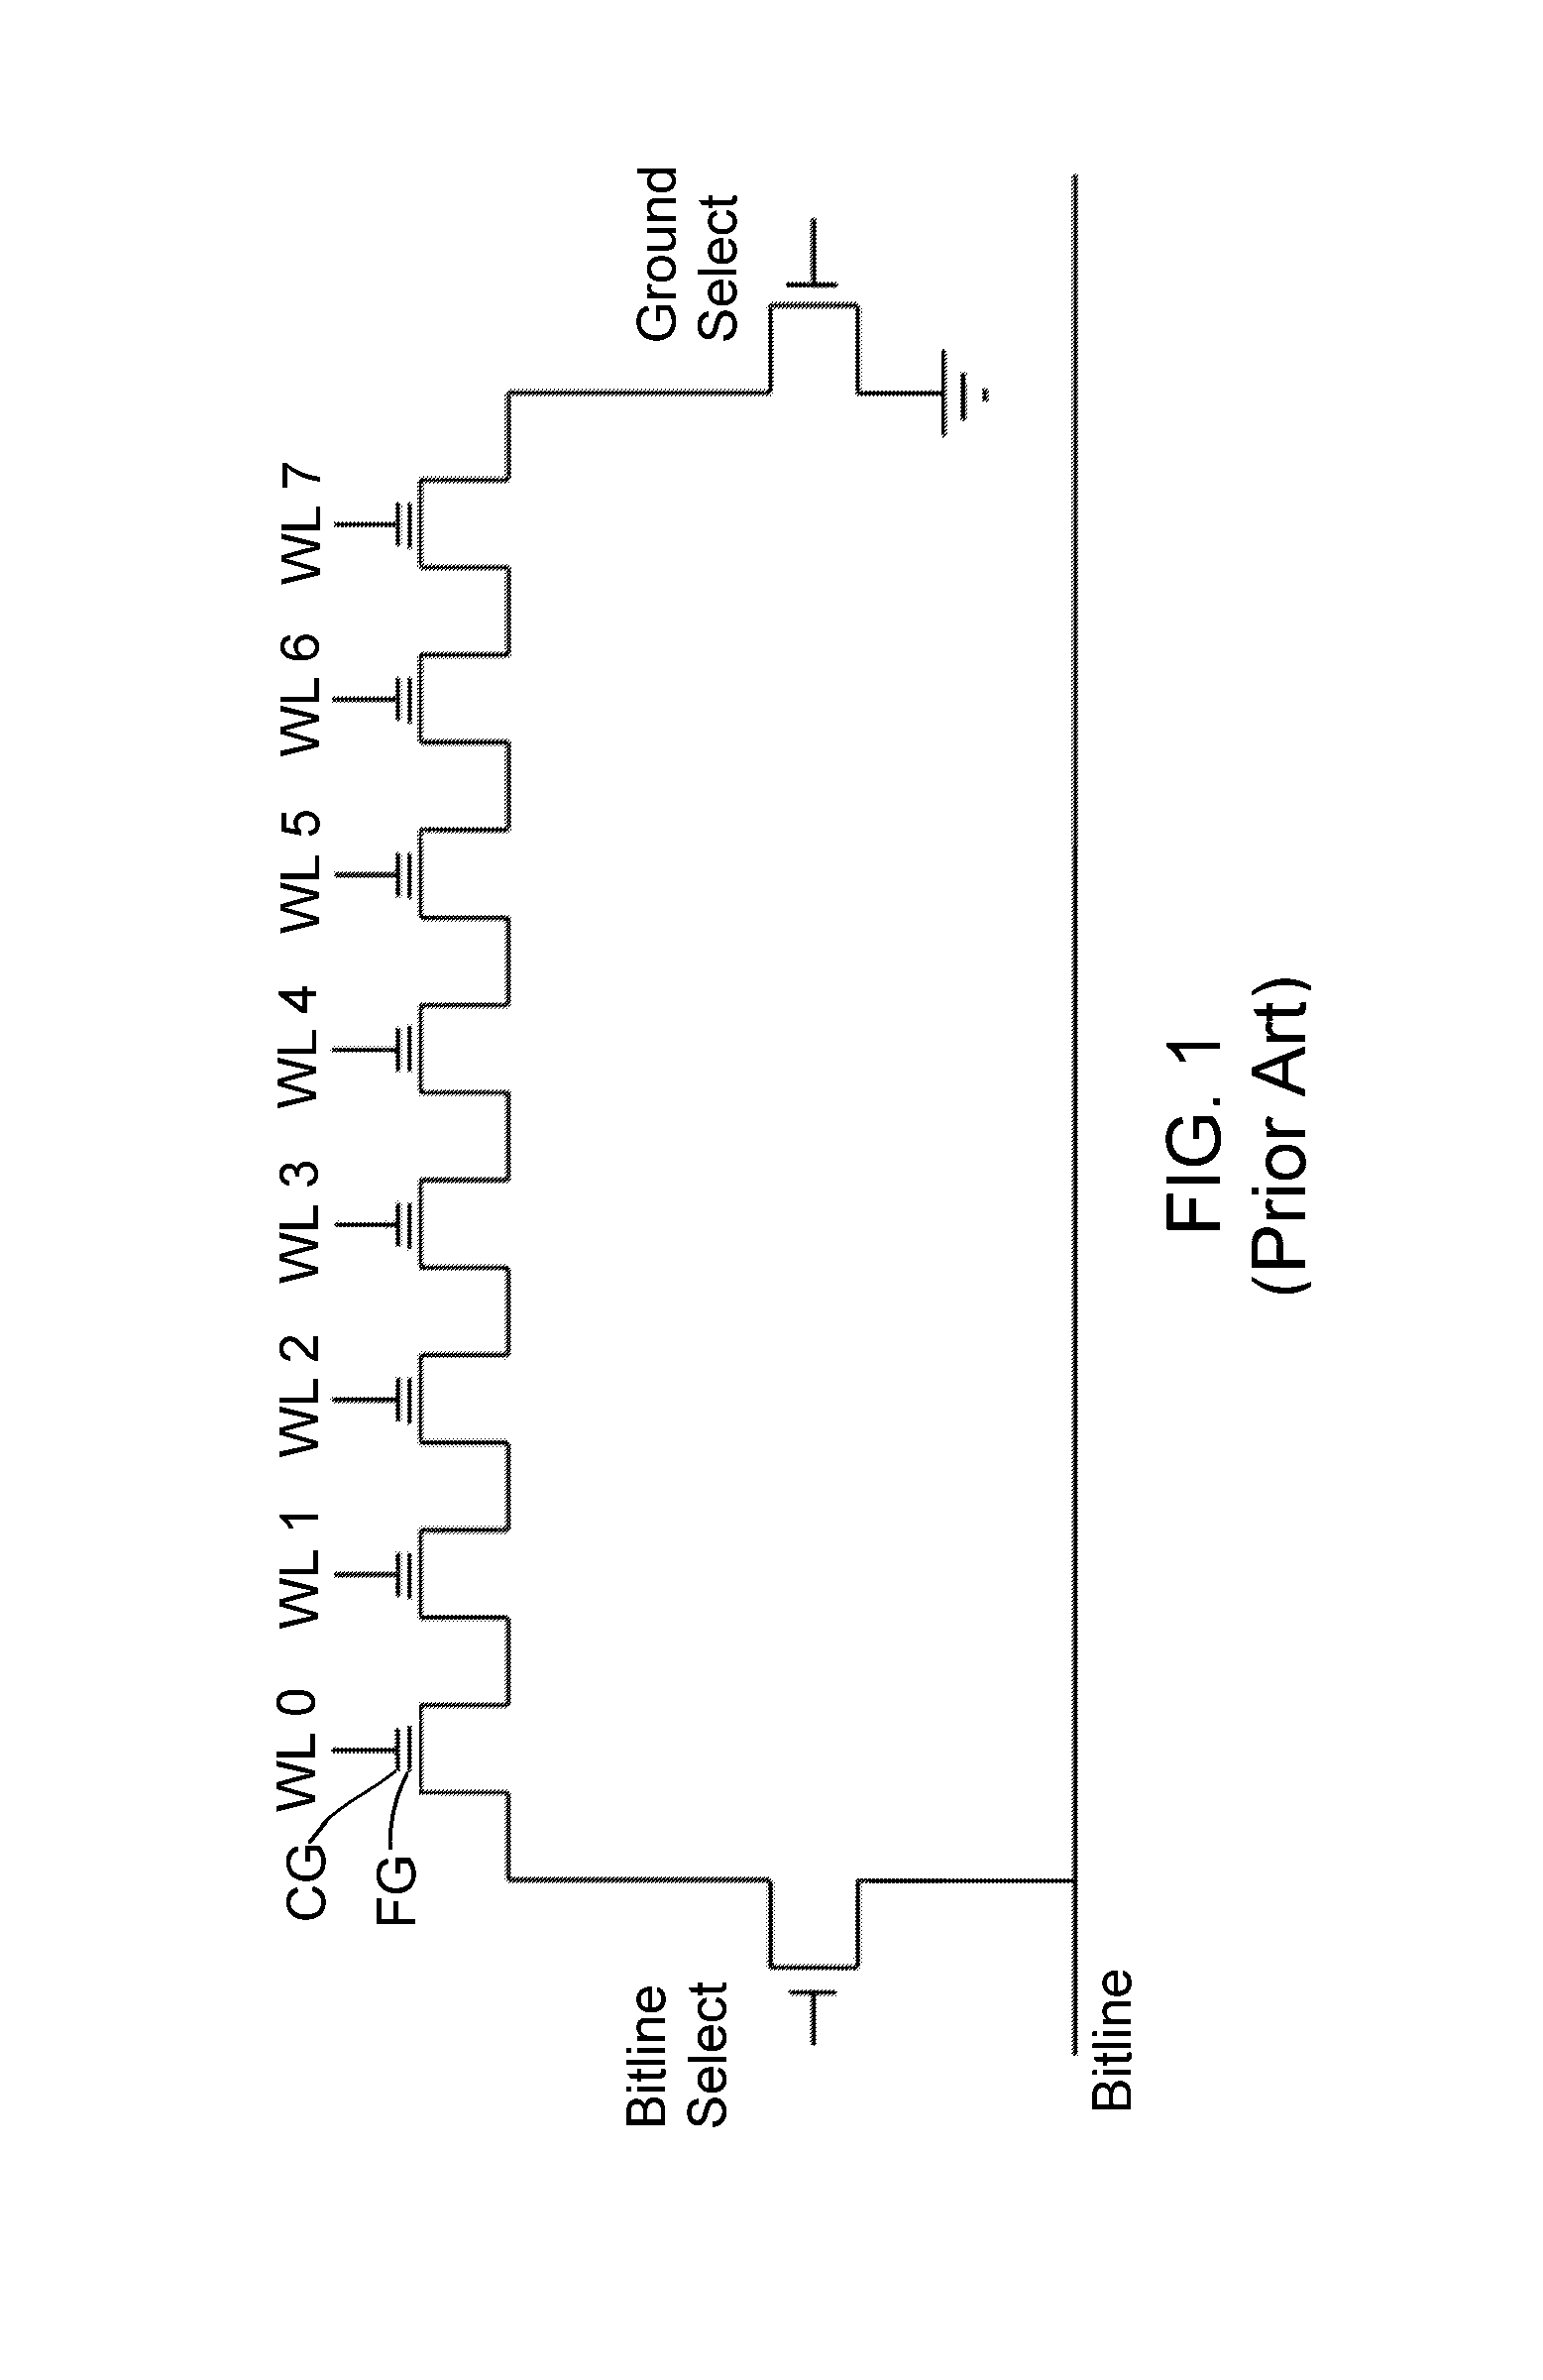 Flash memory device and method of operation